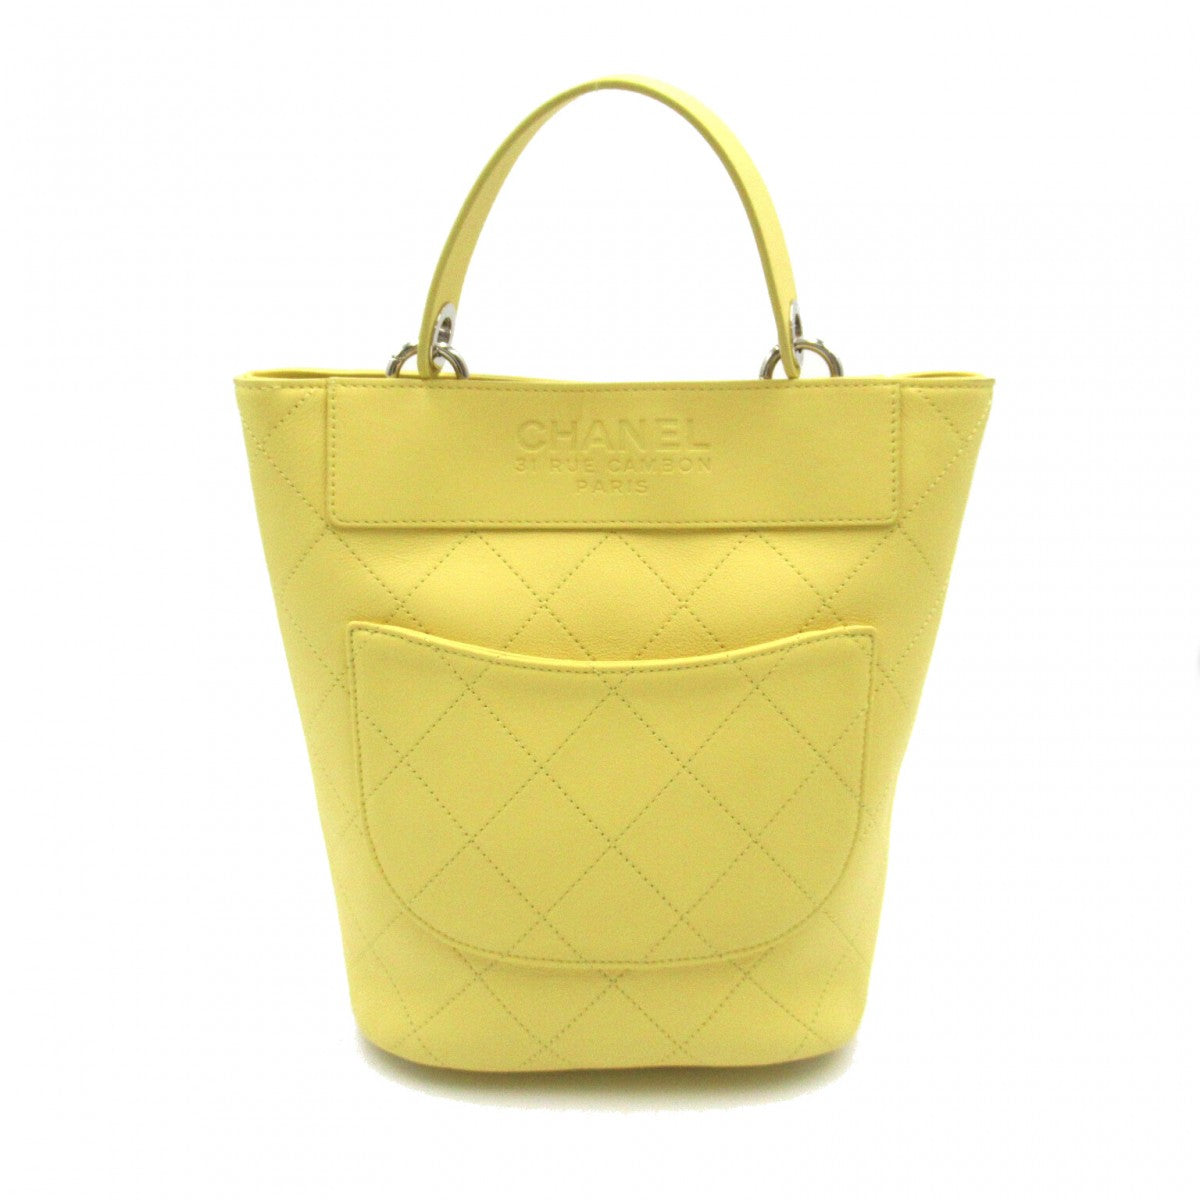 CC Quilted Leather Bucket Handbag